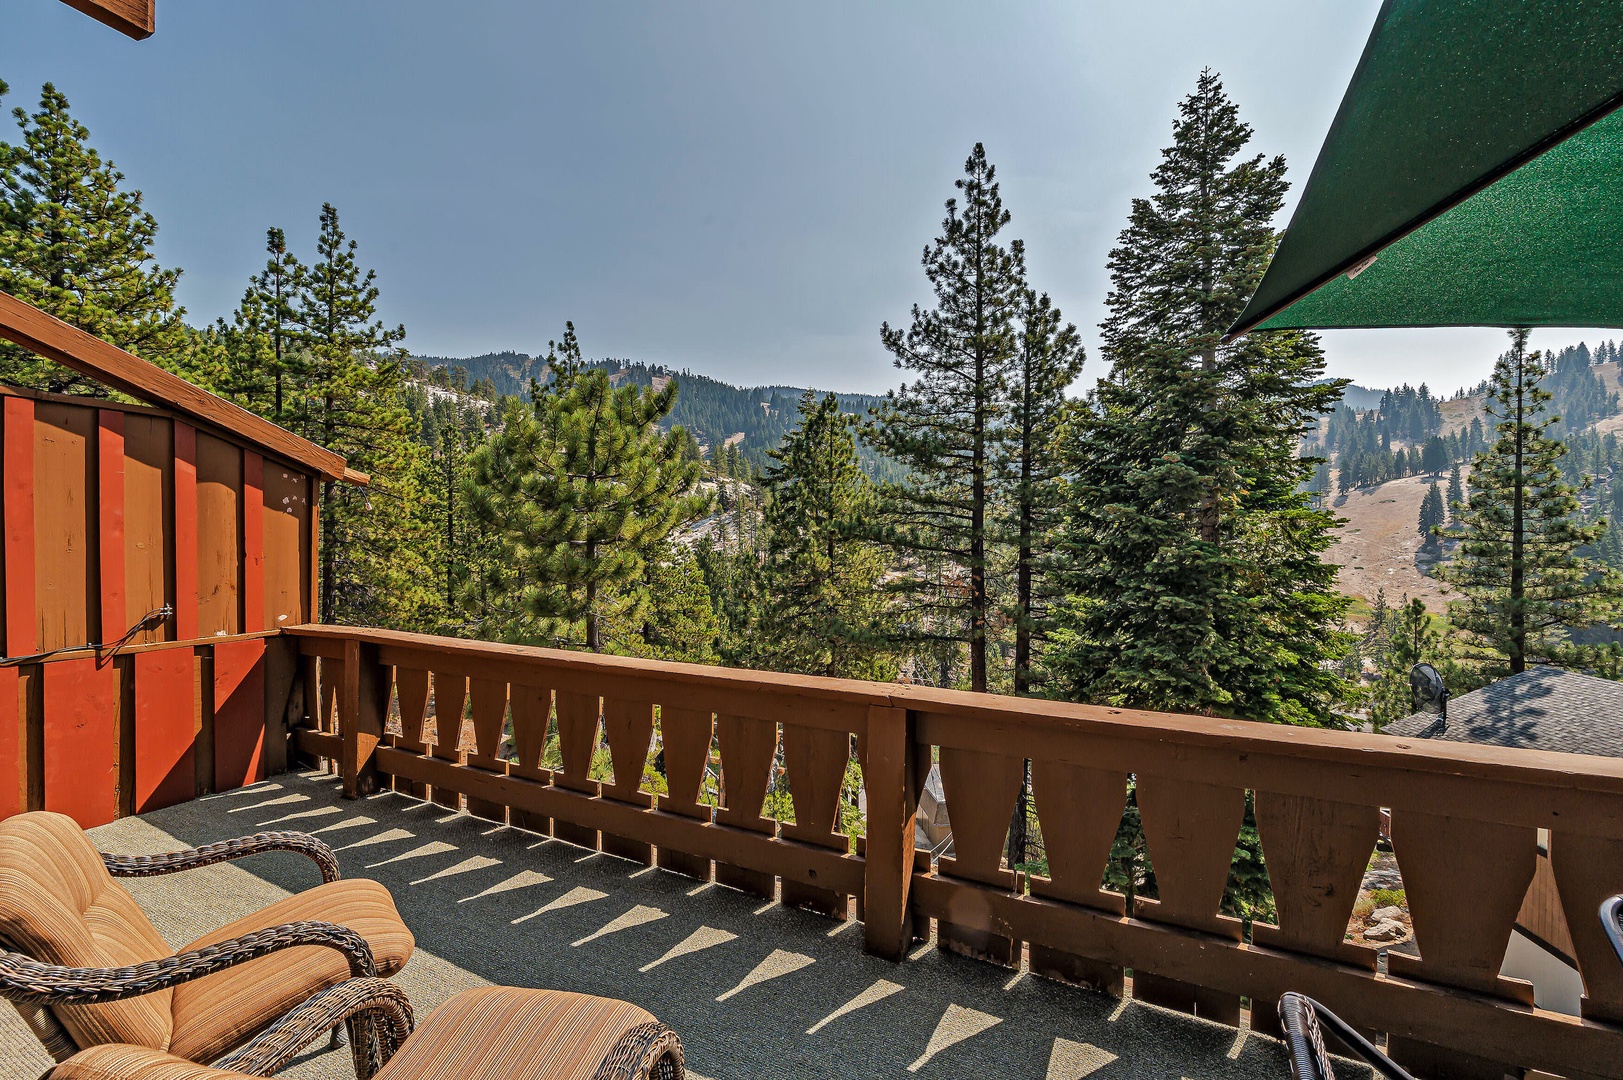 Balcony with BBQ and views of the ski resort